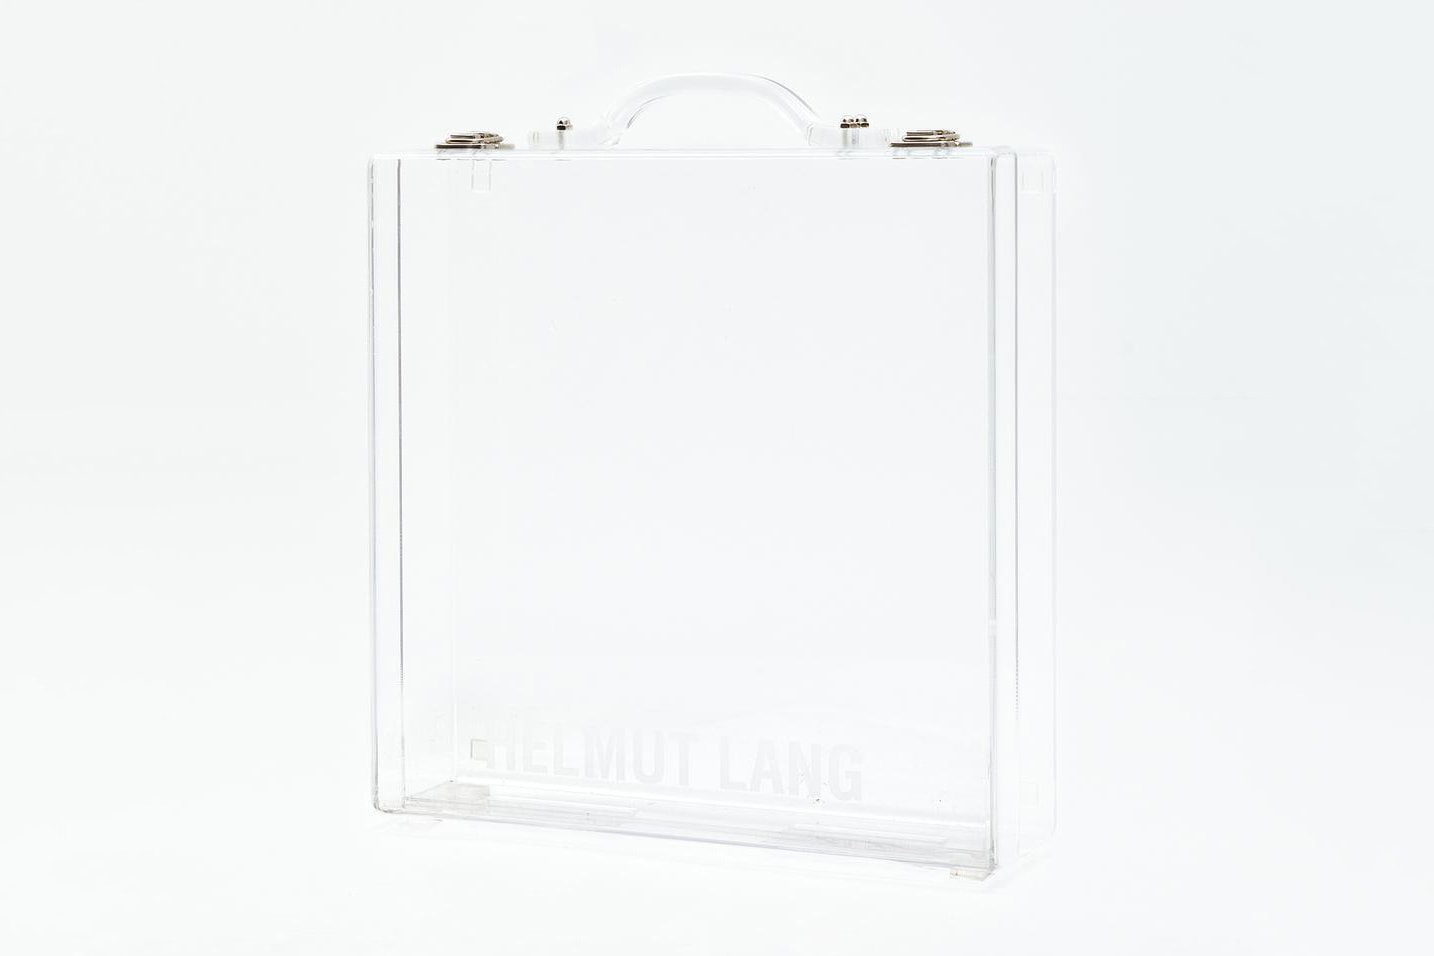 Helmut Lang Releases Lucite Briefcase transparent translucent clear see through